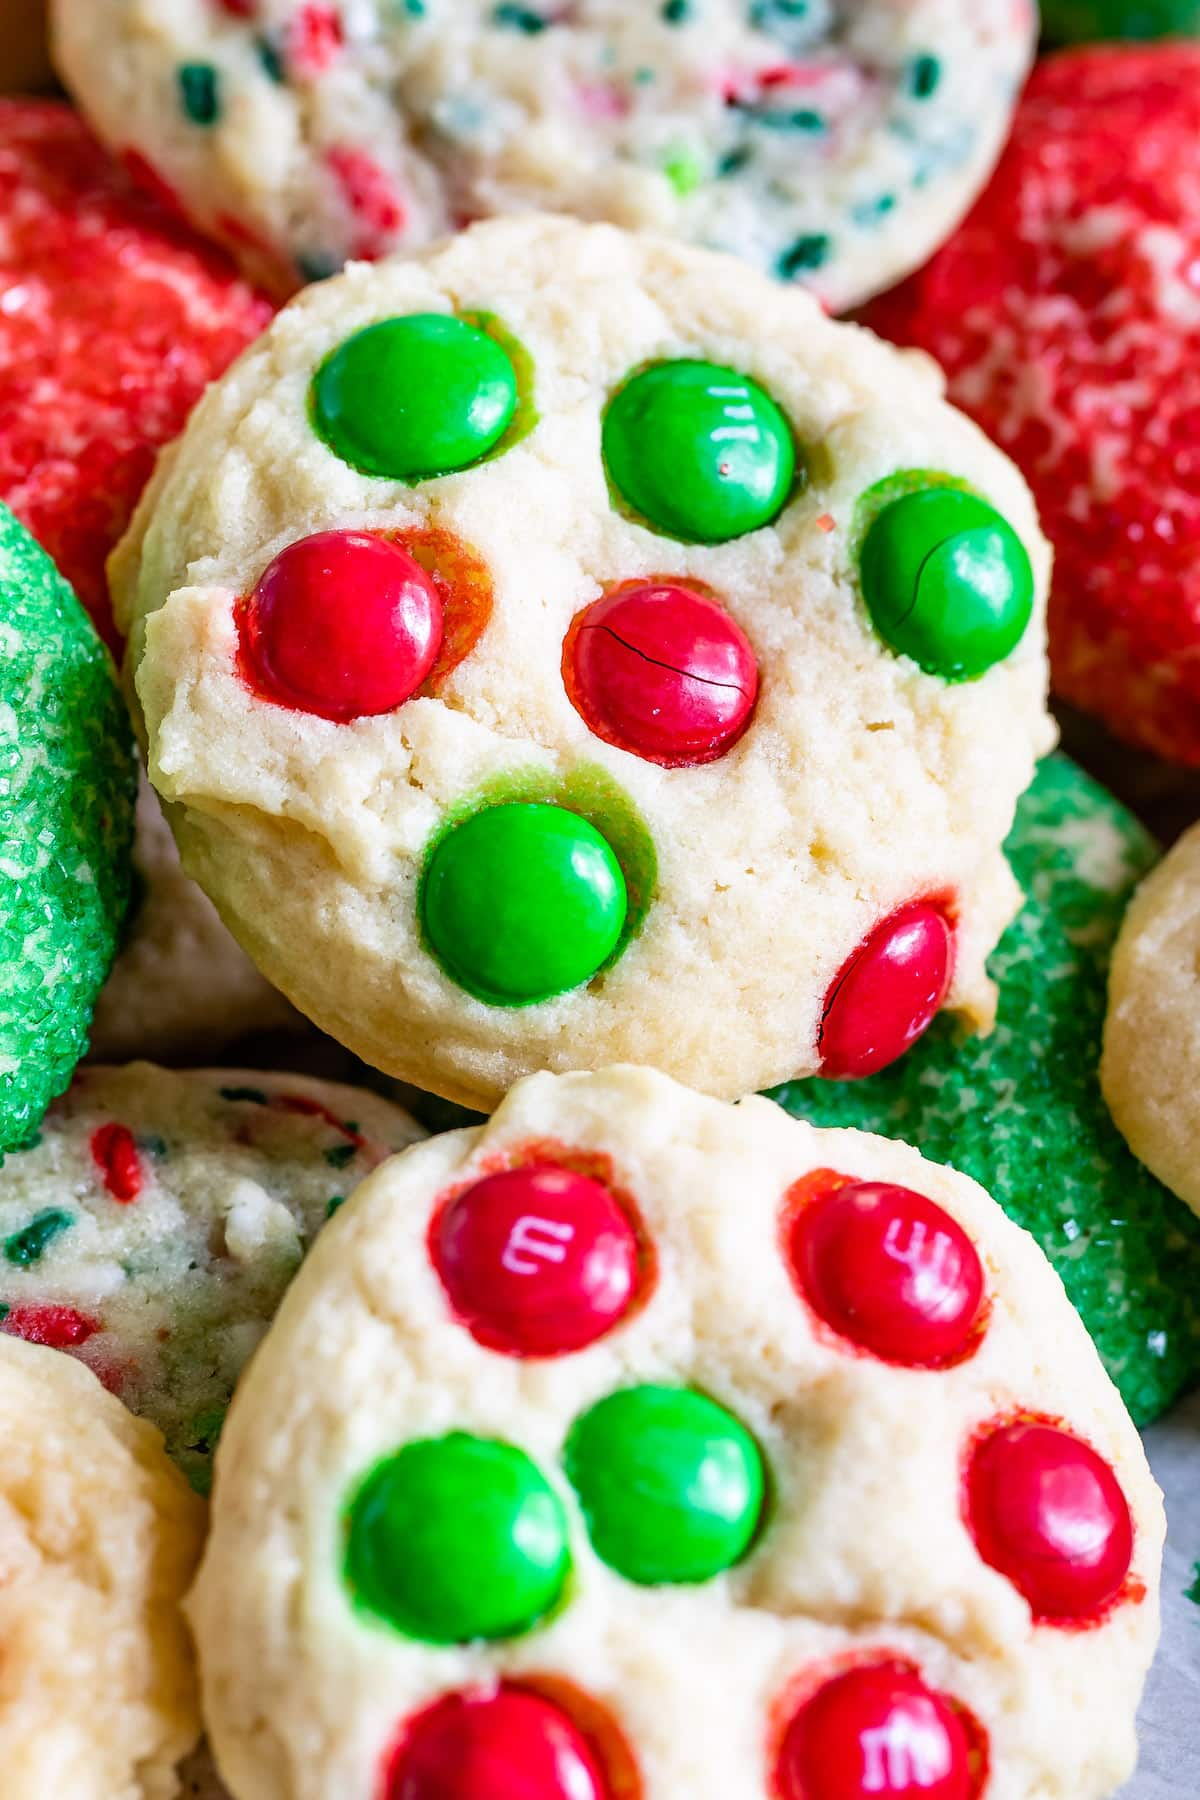 red and green m&ms baked into the sugar cookies